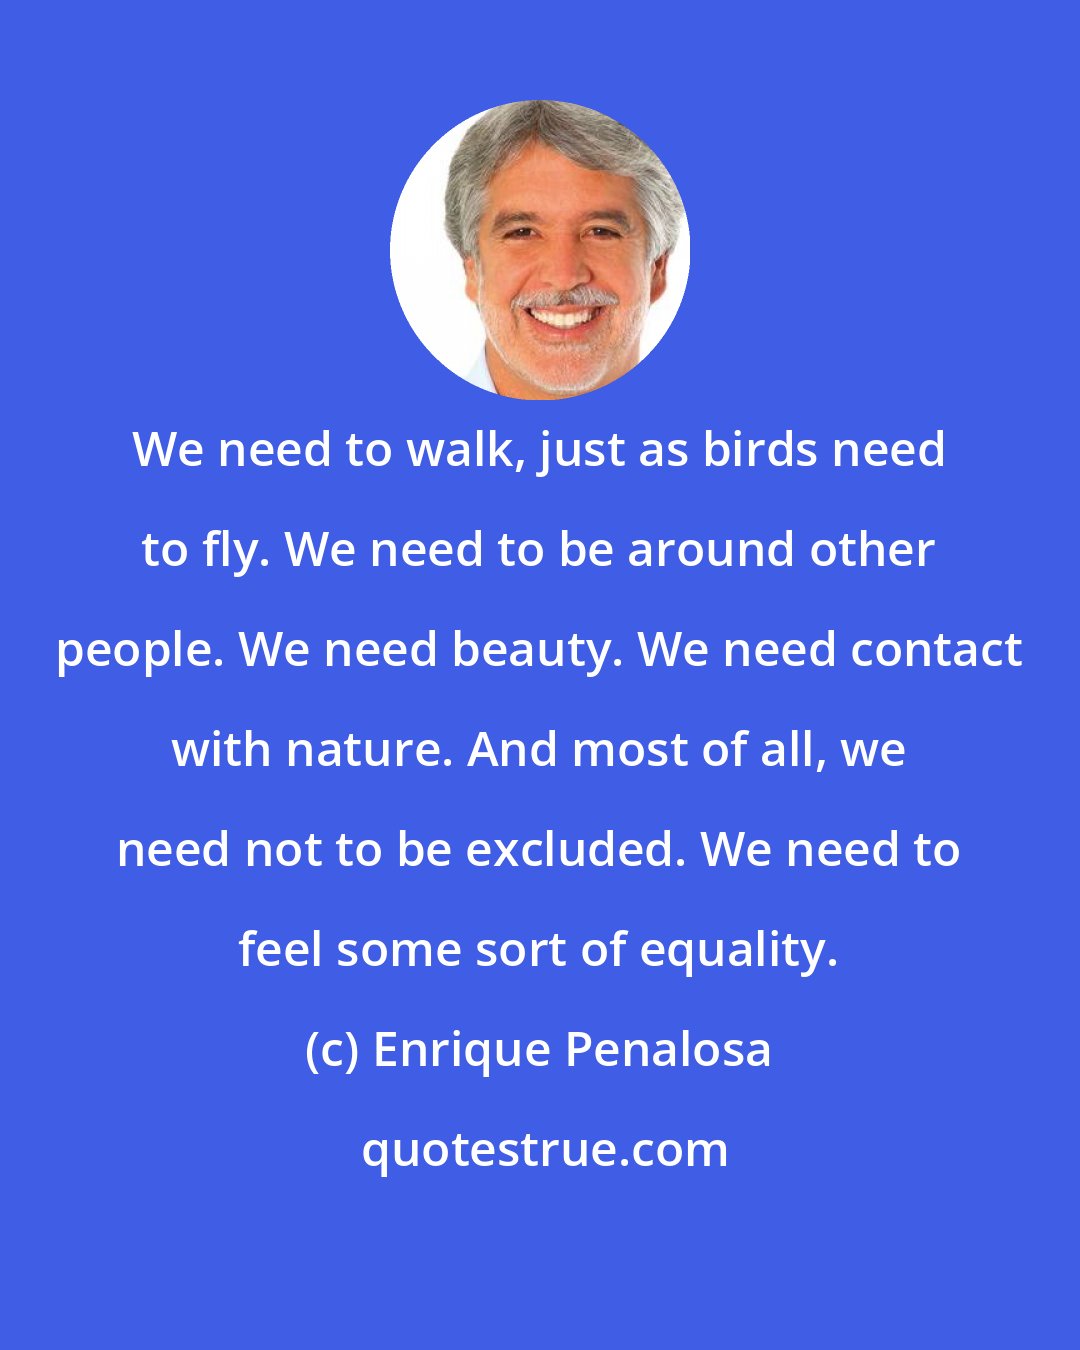 Enrique Penalosa: We need to walk, just as birds need to fly. We need to be around other people. We need beauty. We need contact with nature. And most of all, we need not to be excluded. We need to feel some sort of equality.